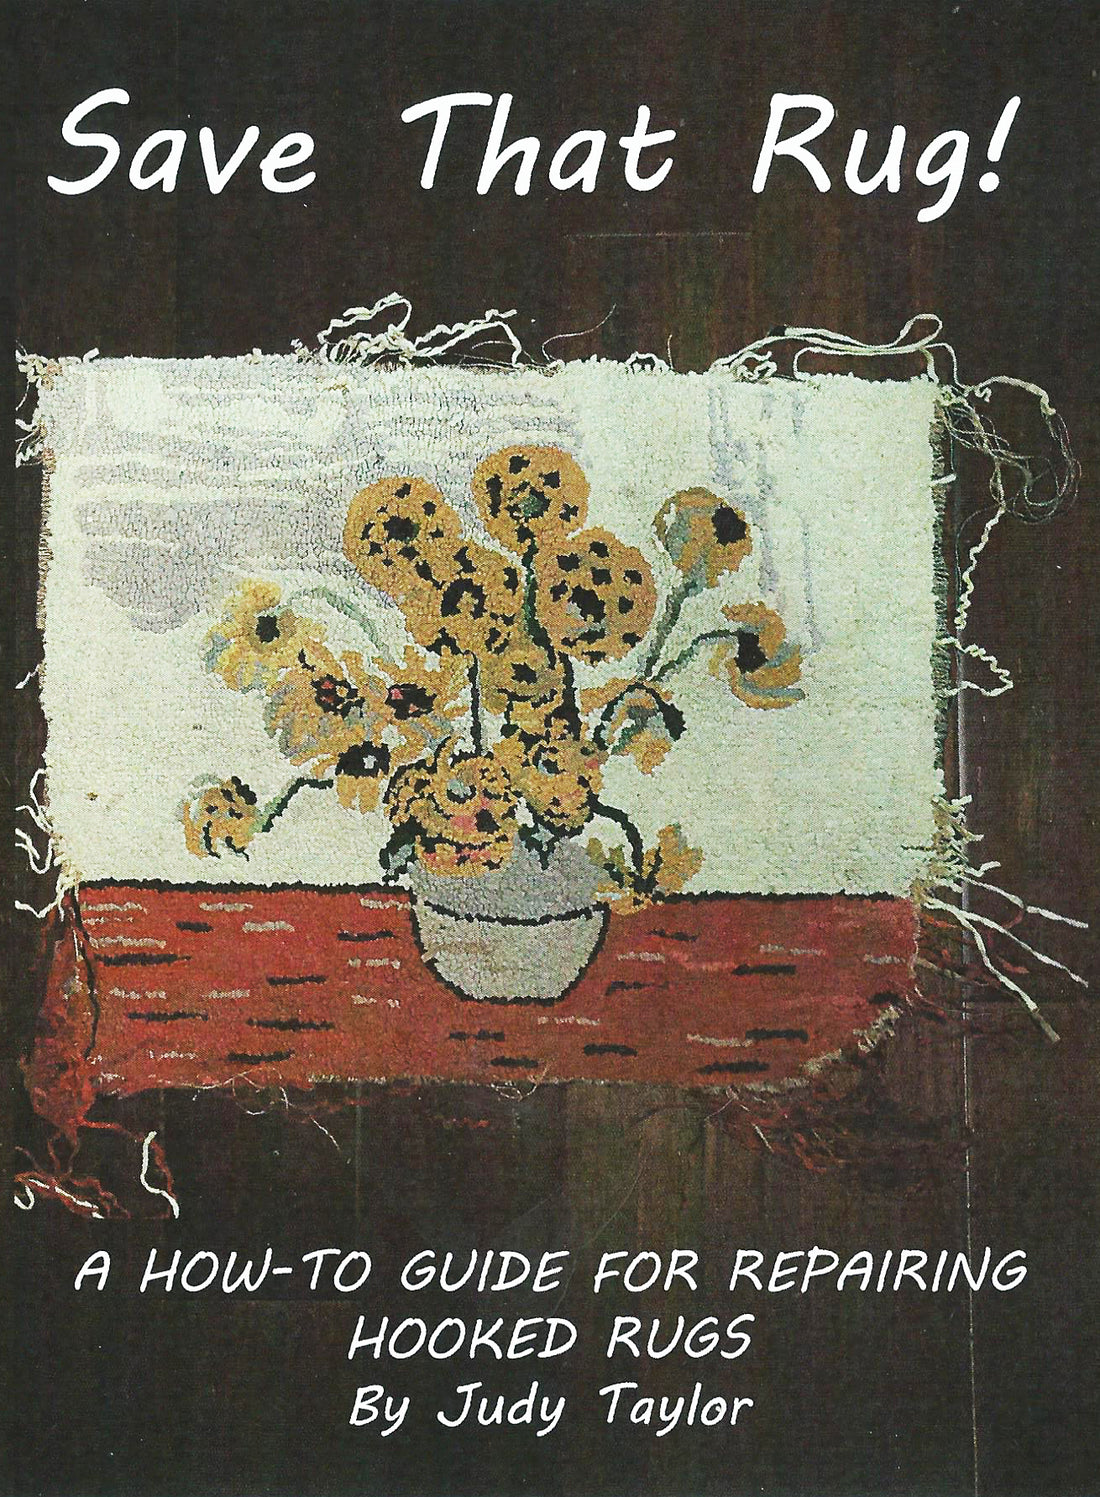 New Book: Save That Rug! A How-to Guide for Repairing Hooked Rugs